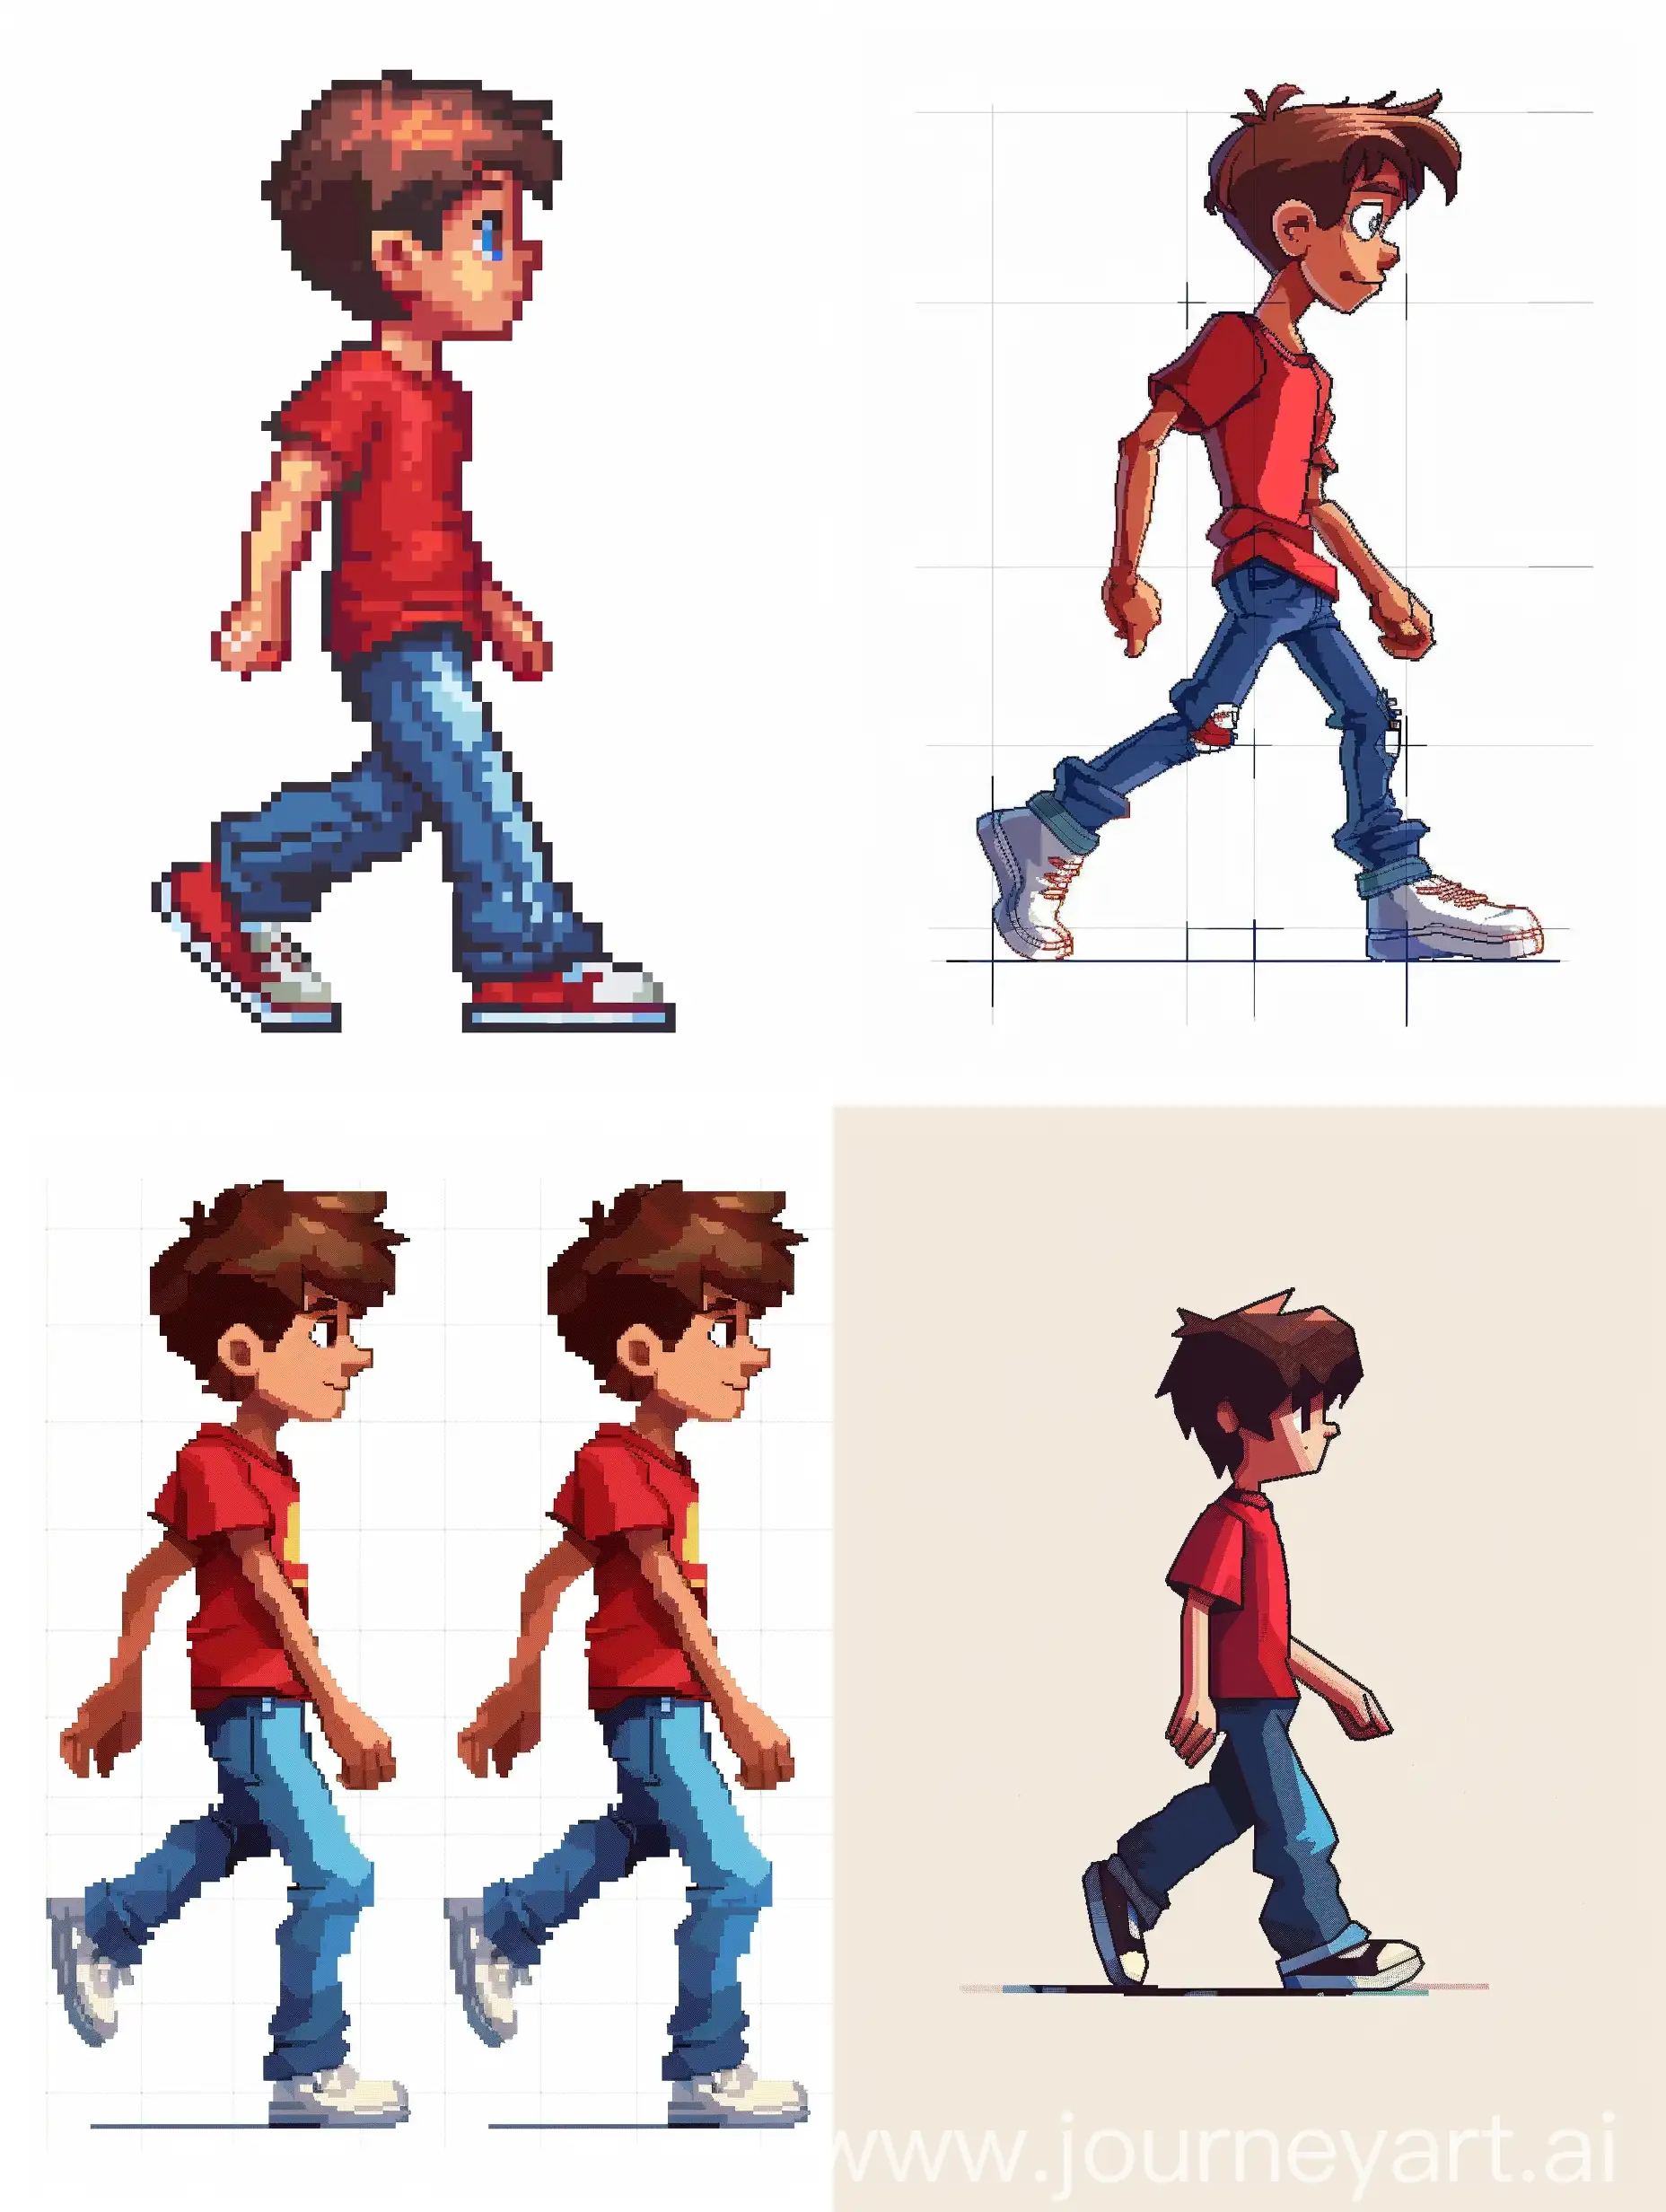 Create a pixel art character of a boy walking to the right. The boy should be about 32x32 pixels in size. He has short brown hair, a red t-shirt, blue jeans, and white sneakers. The walking animation should include at least four frames to show a smooth motion. Pay attention to the details of the boy's clothing and movement, ensuring the arms and legs move naturally as he walks. Use vibrant colors and a clear outline to make the character stand out. --v 6.0 --ar 16:9